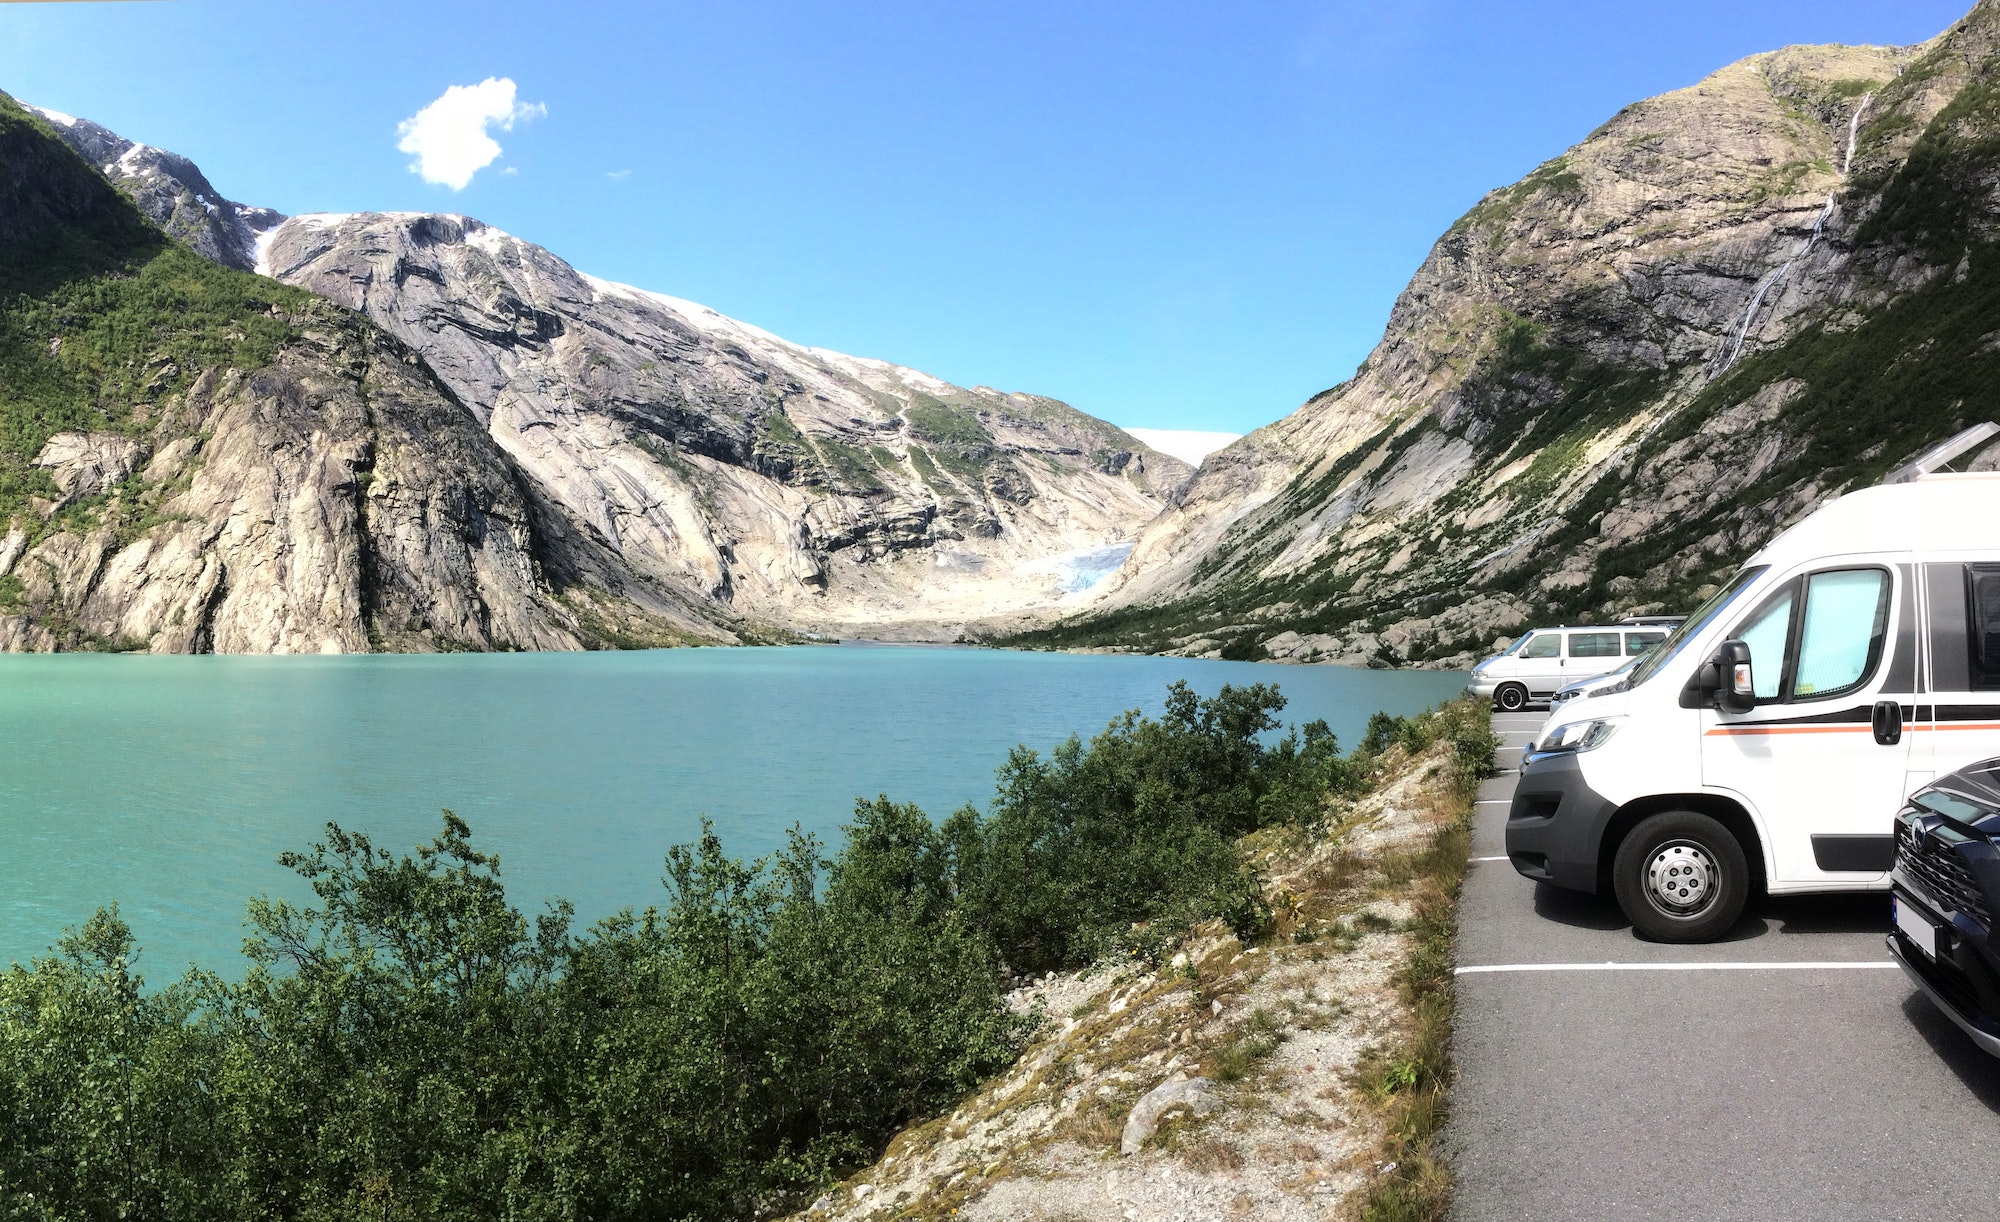 Road trip to the glacier lake in Norway, van life, travelling, car, mountains, blue water, adventure